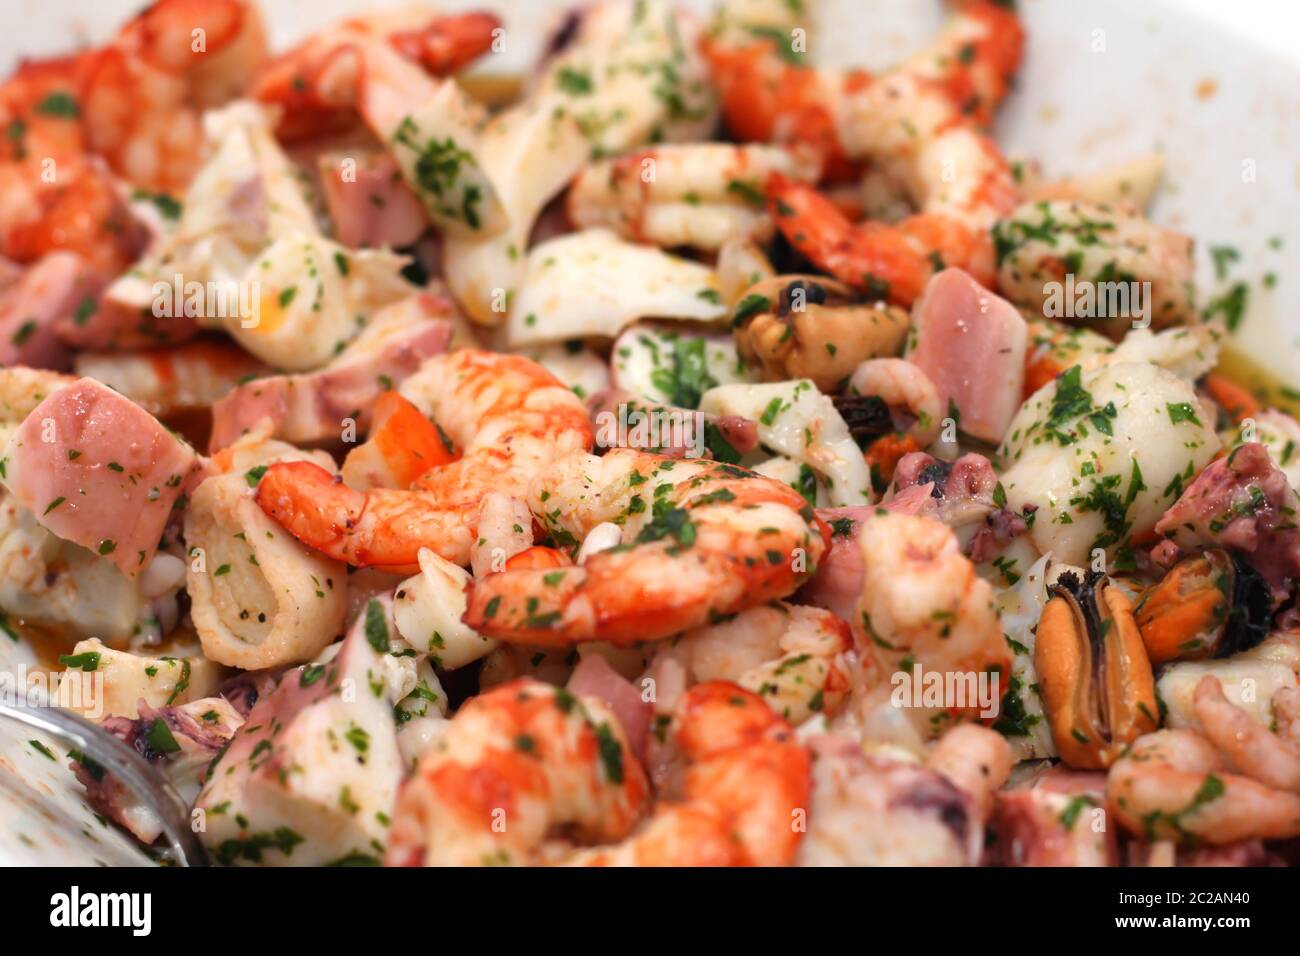 rich and mixed seafood salad on a serving plate Stock Photo